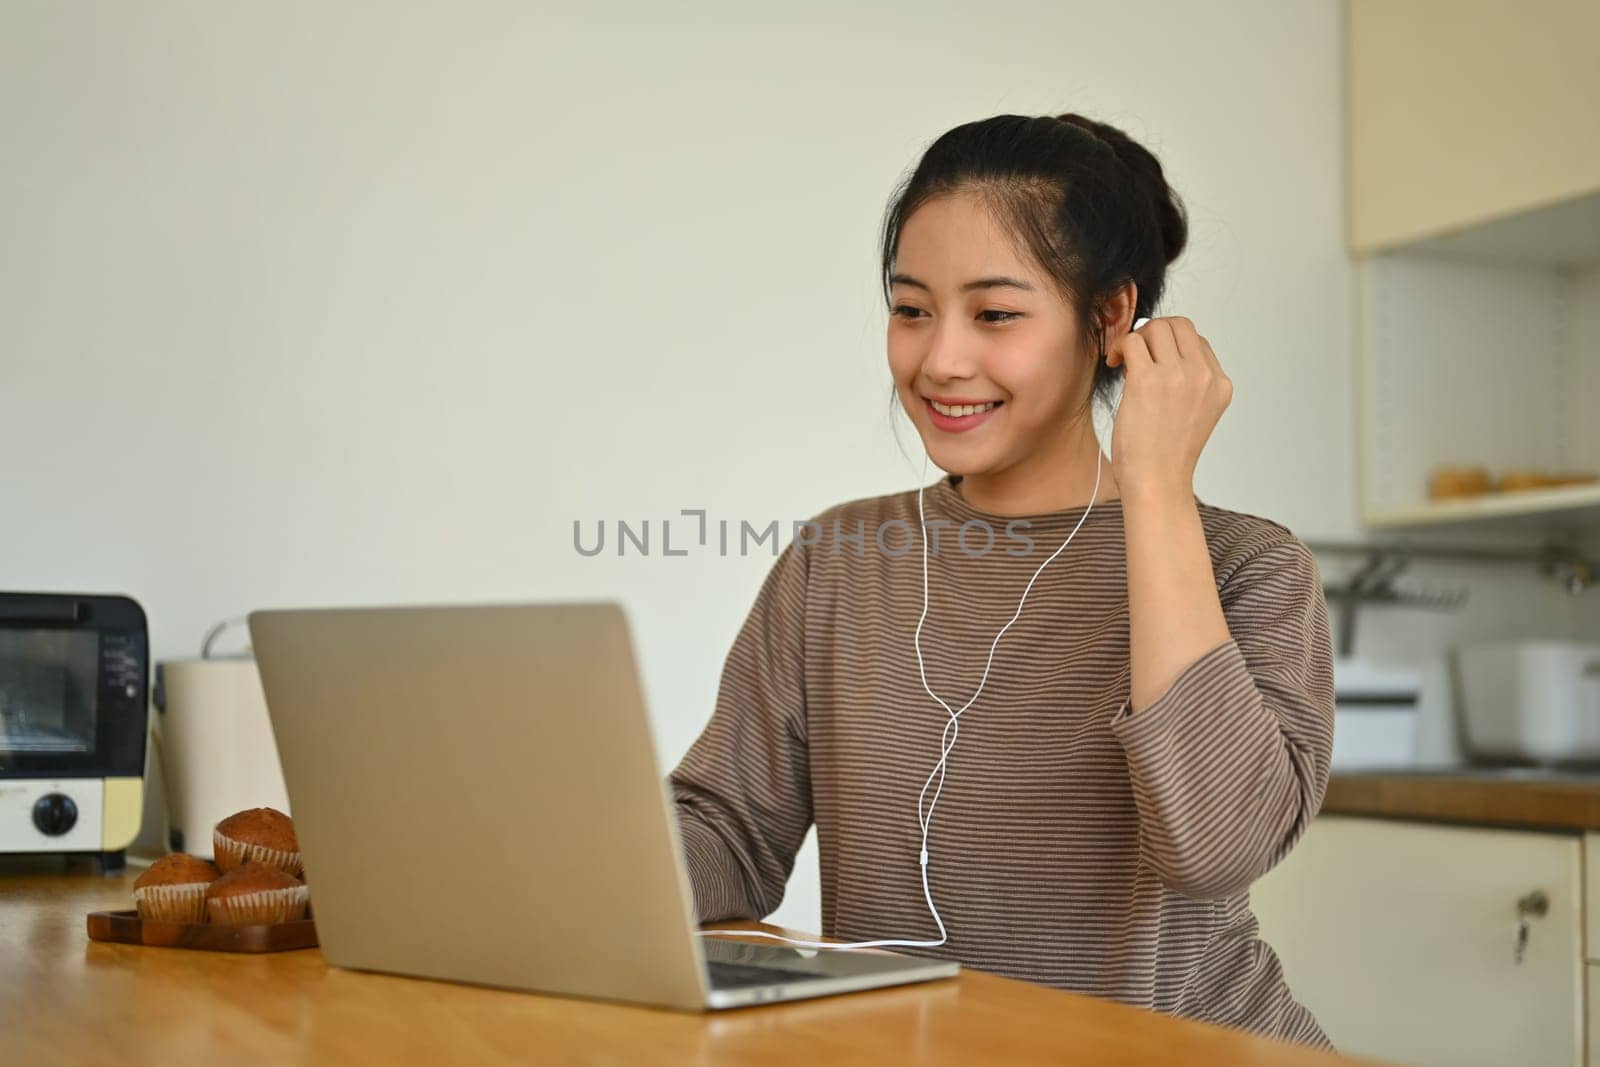 Charming young woman sitting at kitchen counter and working online or browsing internet on laptop.